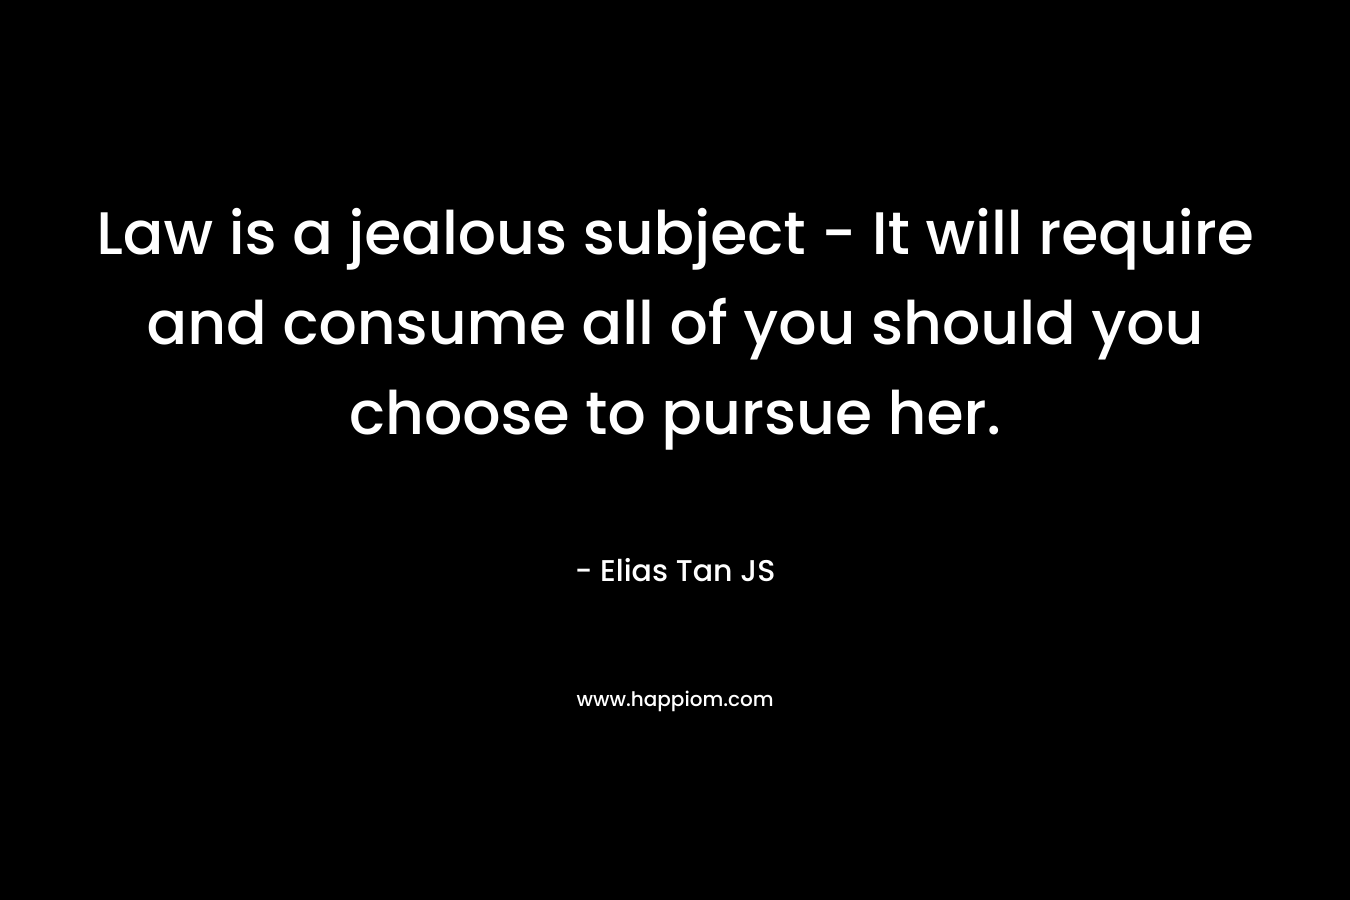 Law is a jealous subject – It will require and consume all of you should you choose to pursue her. – Elias Tan JS